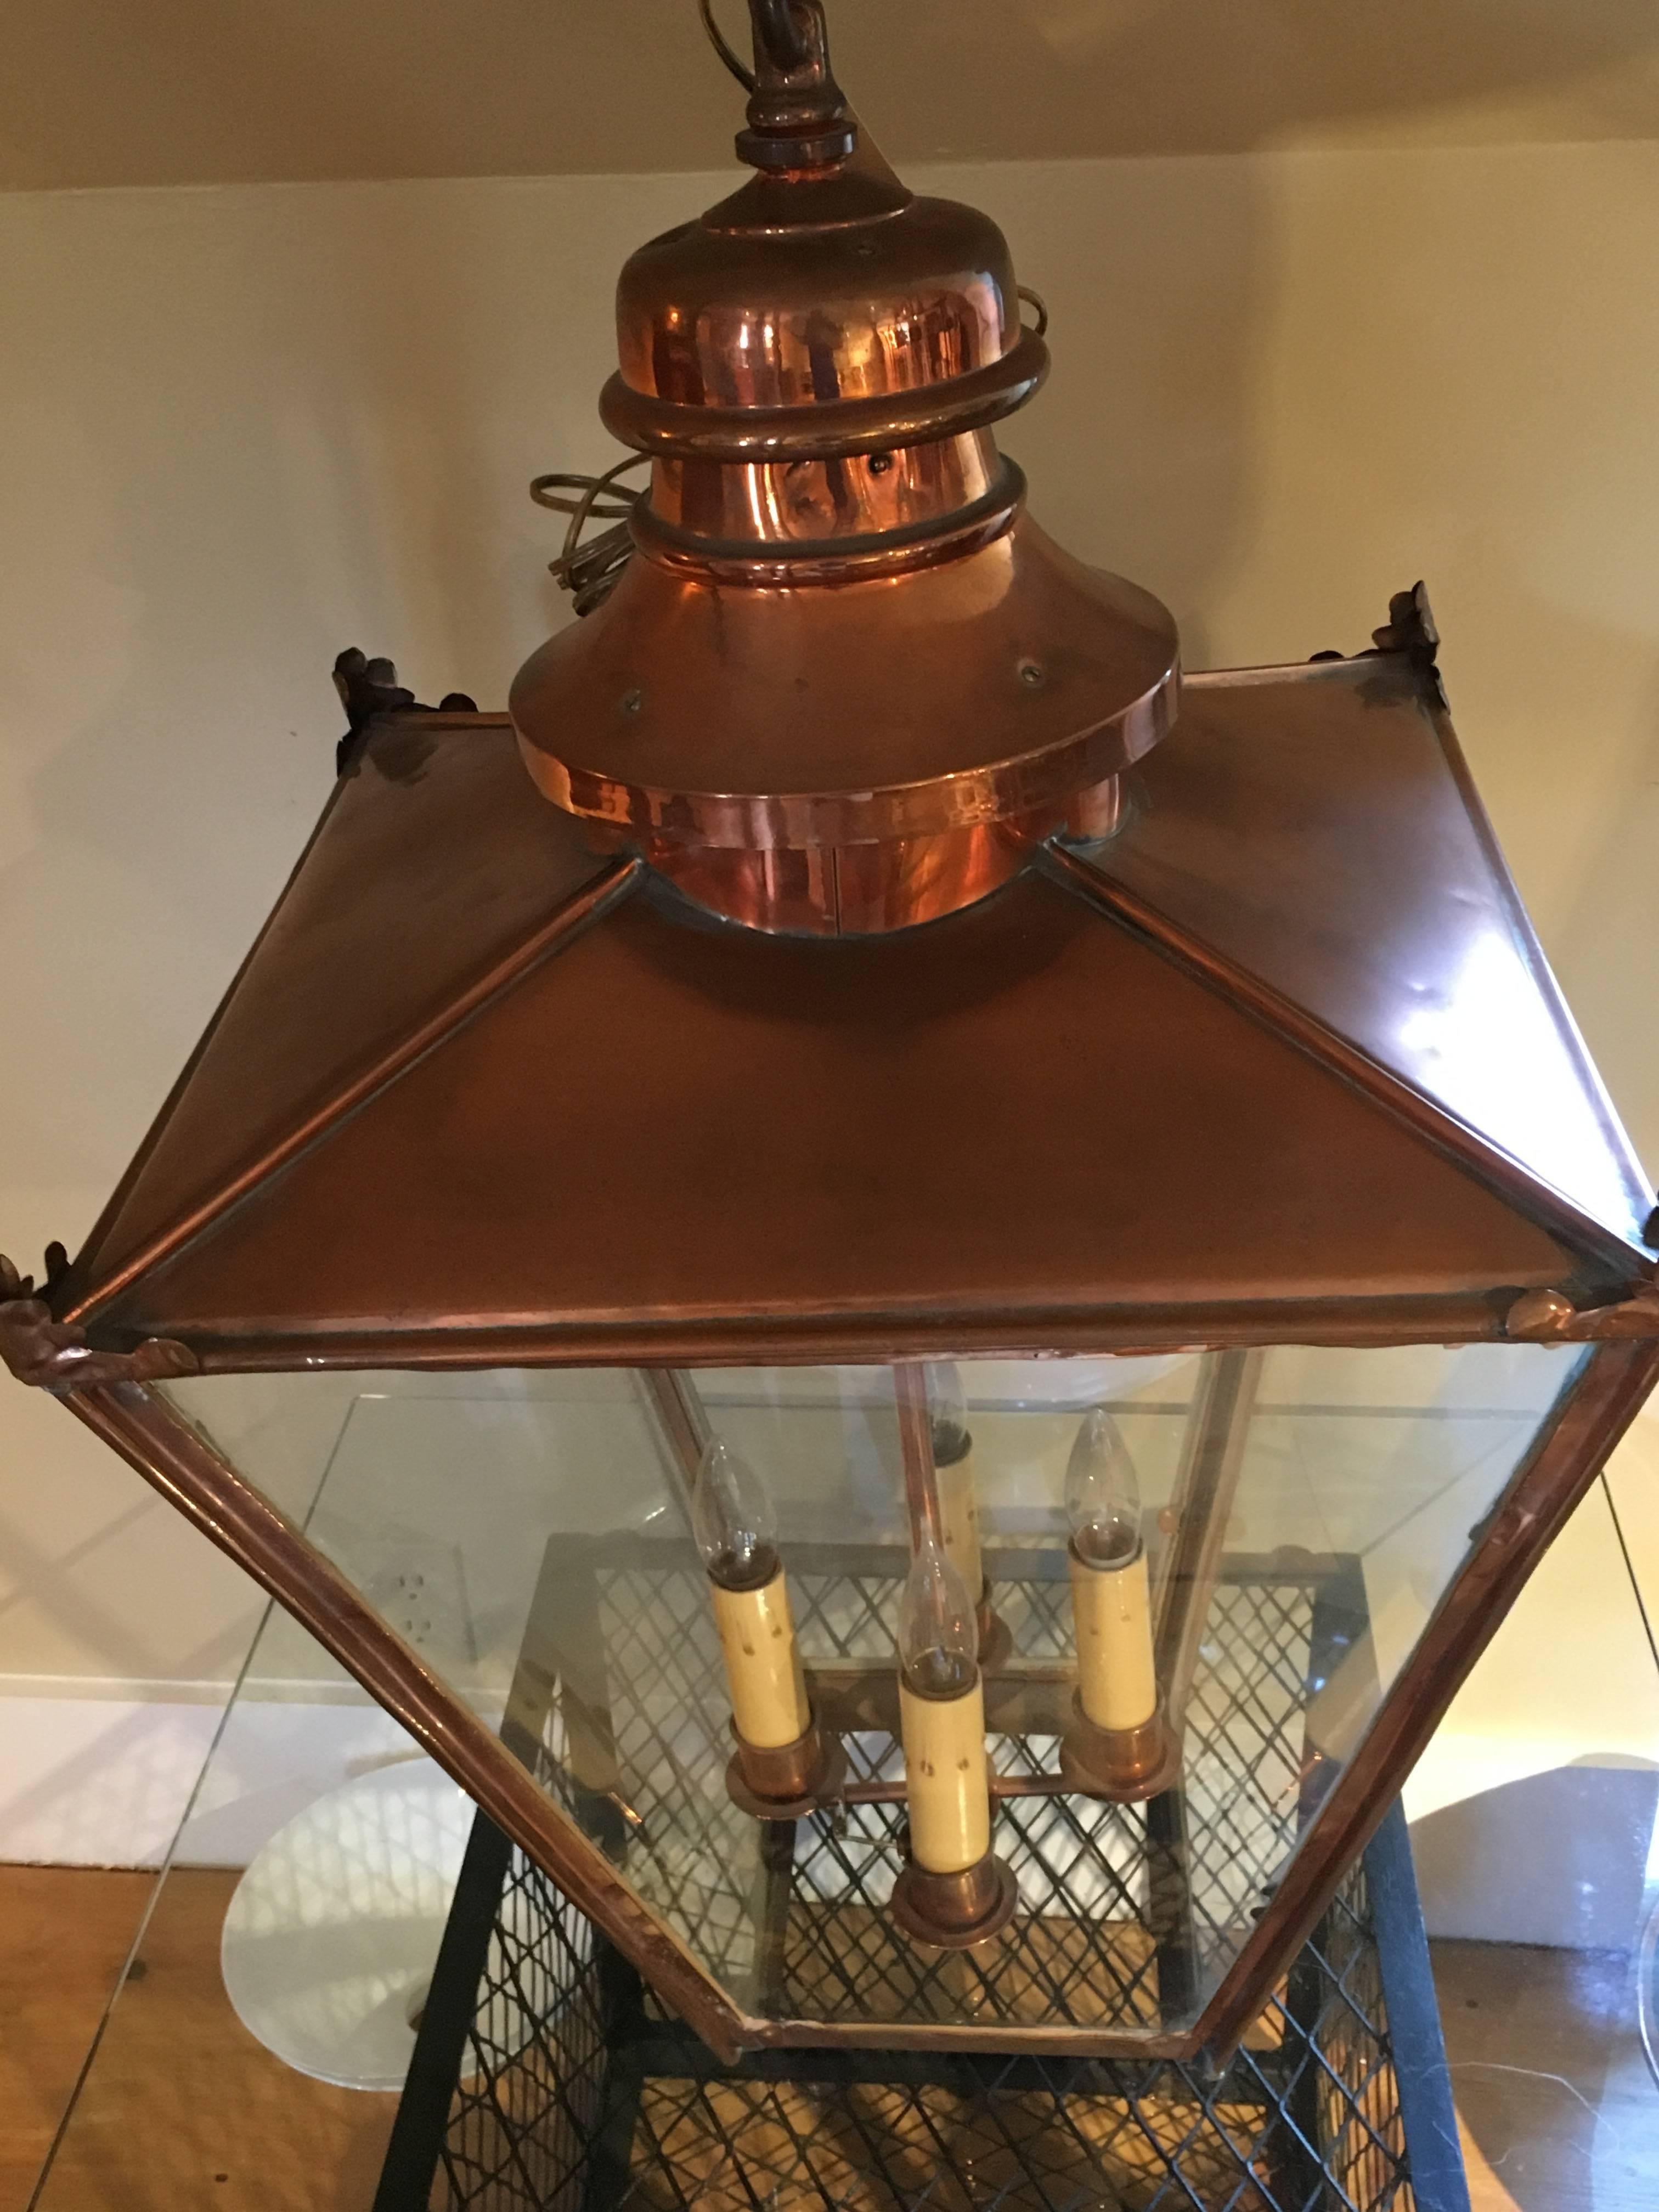 A large Georgian style English hanging hall lantern in copper with glass panes, a chimney top and a four-light cluster with candelabra bulbs.